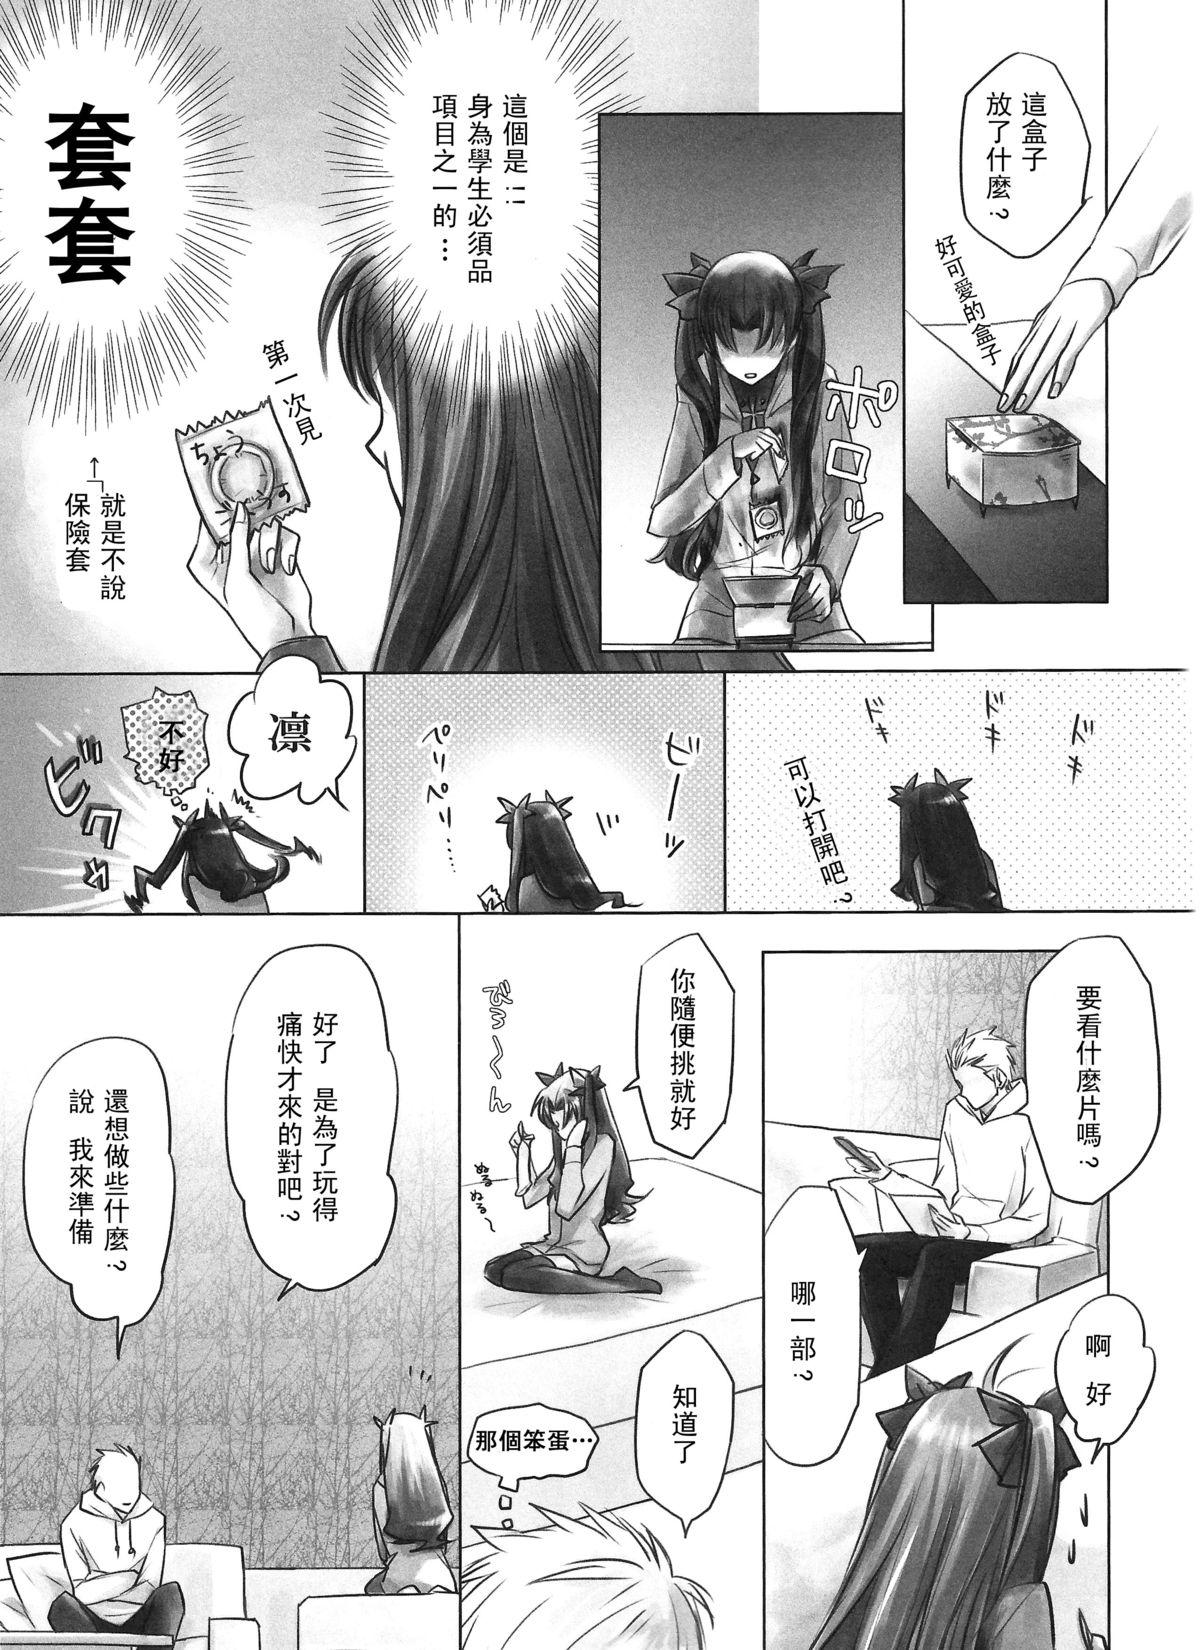 Smoking One/stay night - Fate stay night Foursome - Page 7